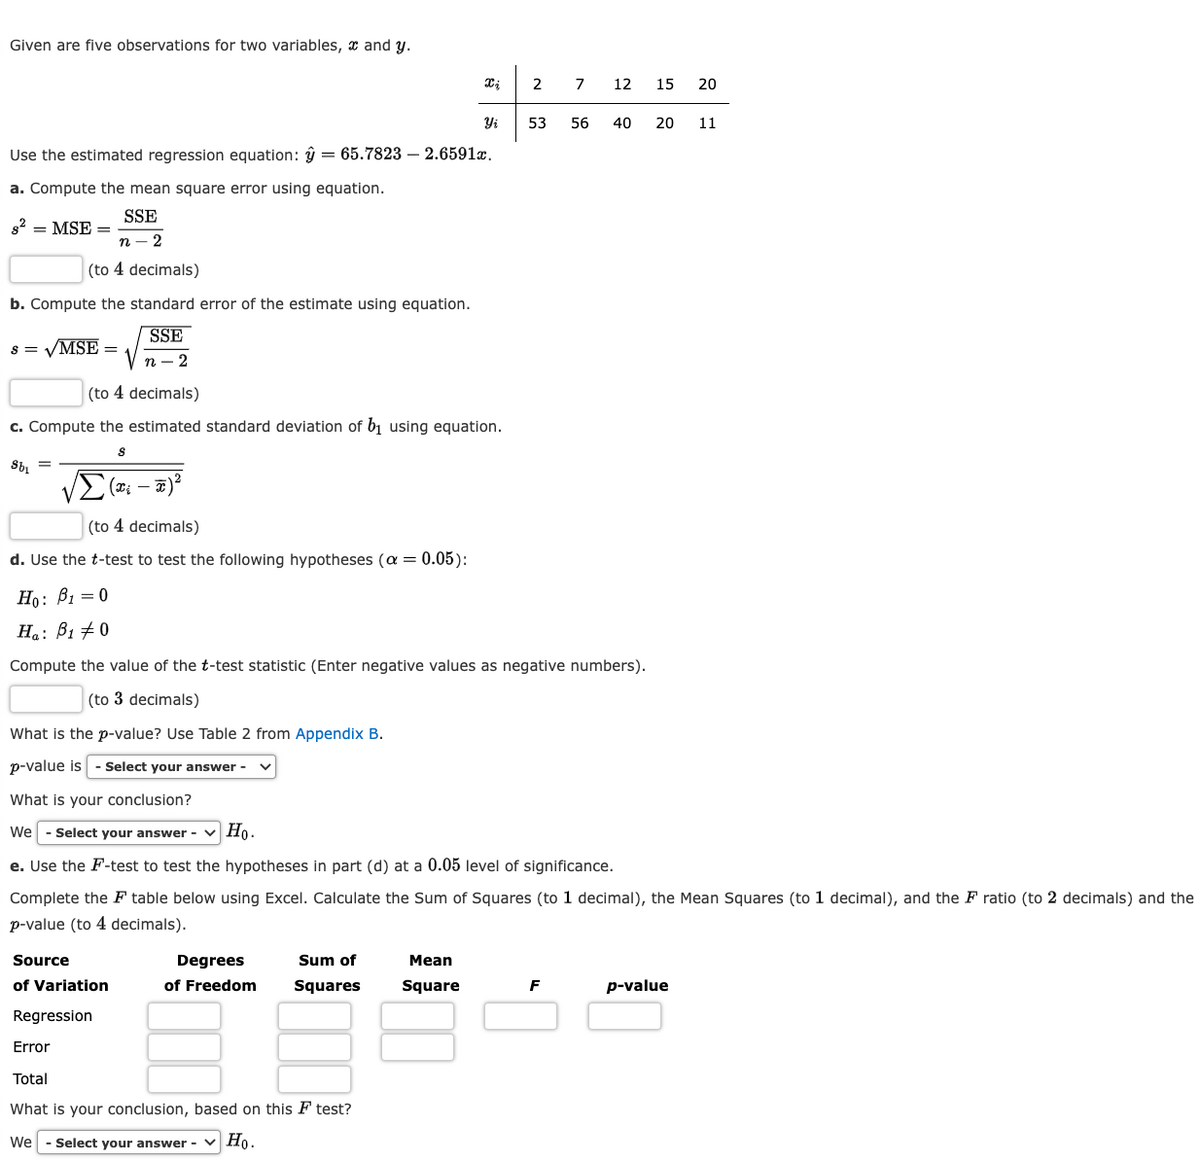 Given are five observations for two variables, and y.
s² = MSE =
Use the estimated regression equation: y = 65.7823 2.6591x.
a. Compute the mean square error using equation.
SSE
n - 2
(to 4 decimals)
b. Compute the standard error of the estimate using equation.
SSE
n-2
s = √MSE =
- x)²
(to 4 decimals)
c. Compute the estimated standard deviation of b₁ using equation.
S
Sb₁
Xi -
(to 4 decimals)
d. Use the t-test to test the following hypotheses (α = 0.05):
Ho: B1 = 0
Ha: B1 0
What is the p-value? Use Table 2 from Appendix B.
p-value is - Select your answer -
Xi
Degrees
of Freedom
Yi
Compute the value of the t-test statistic (Enter negative values as negative numbers).
(to 3 decimals)
Sum of
Squares
Regression
Error
Total
What is your conclusion, based on this F test?
We - Select your answer - Ho.
What is your conclusion?
We - Select your answer - ✓ Ho.
e. Use the F-test to test the hypotheses in part (d) at a 0.05 level of significance.
Complete the F table below using Excel. Calculate the Sum of Squares (to 1 decimal), the Mean Squares (to 1 decimal), and the F ratio (to 2 decimals) and the
p-value (to 4 decimals).
Source
of Variation
Mean
Square
2 7 12 15 20
53 56 40 20 11
F
p-value